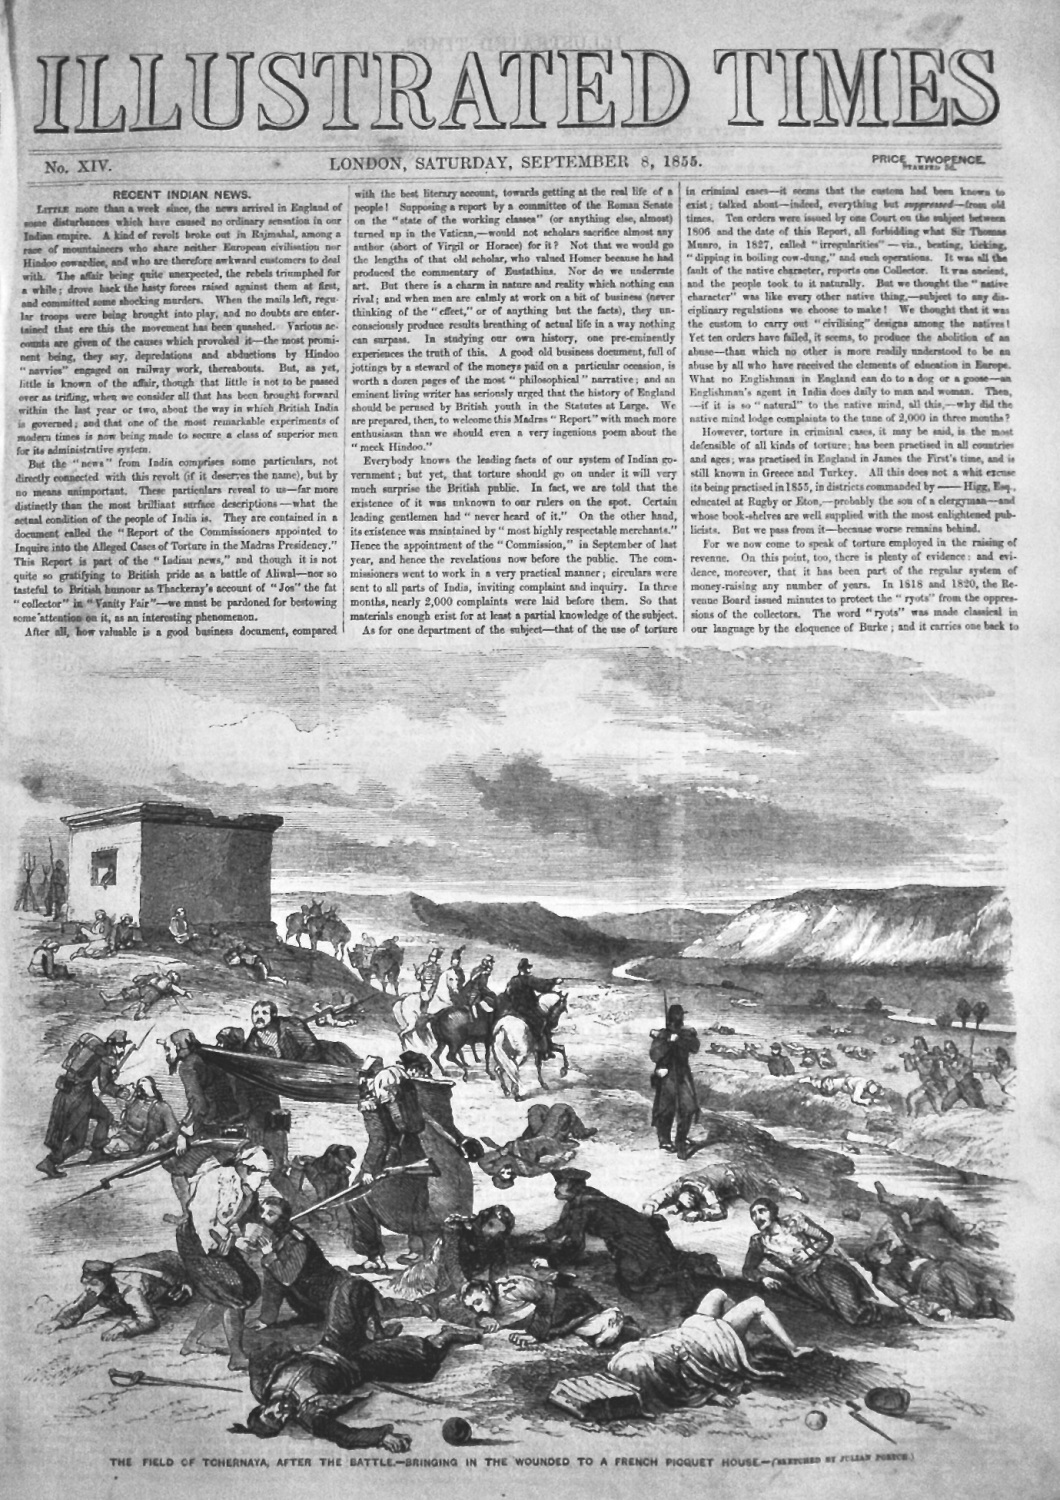 Illustrated Times, September 8th, 1855.